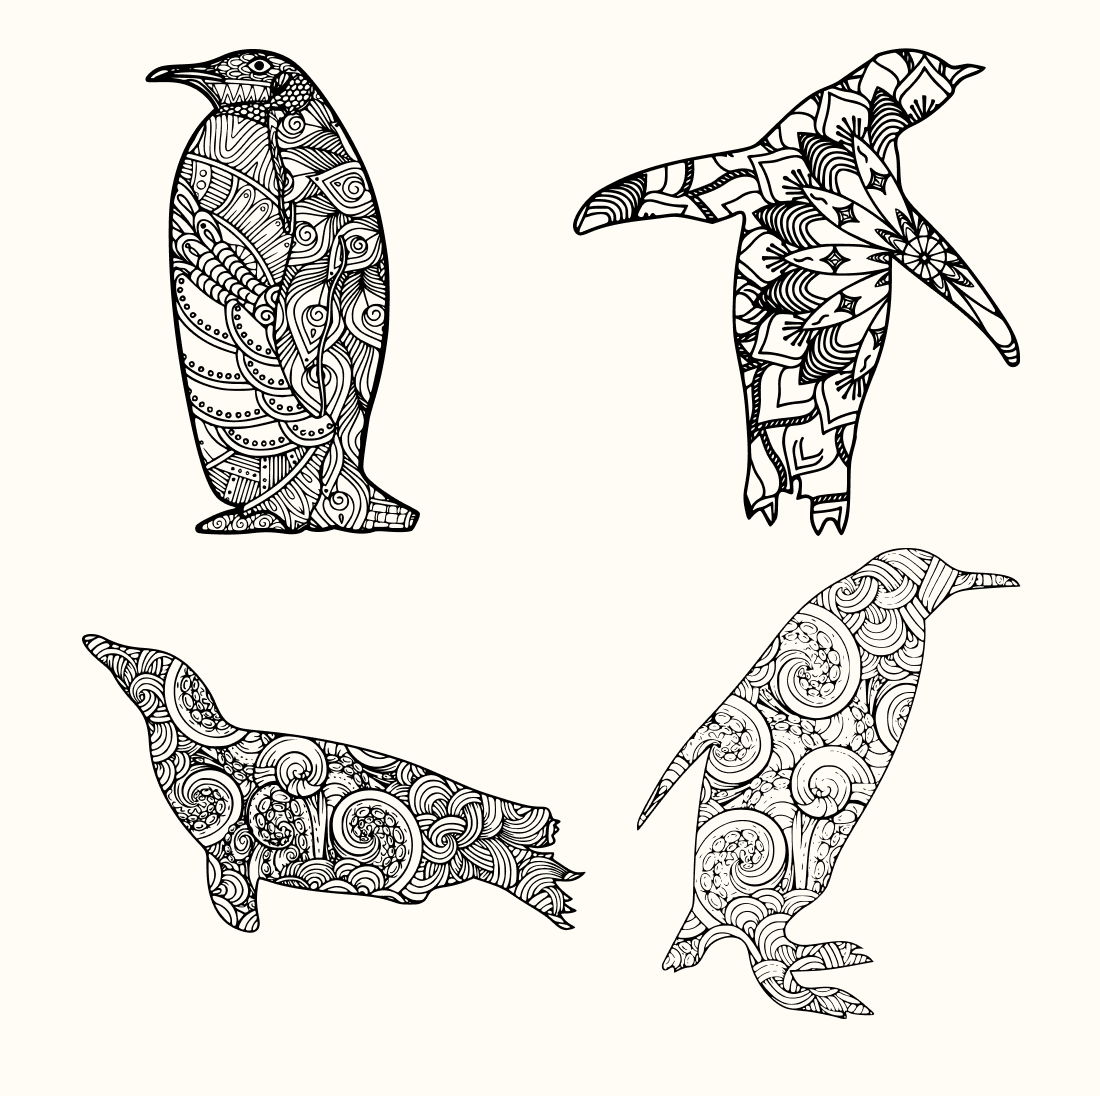 Four penguins with different patterns on them.